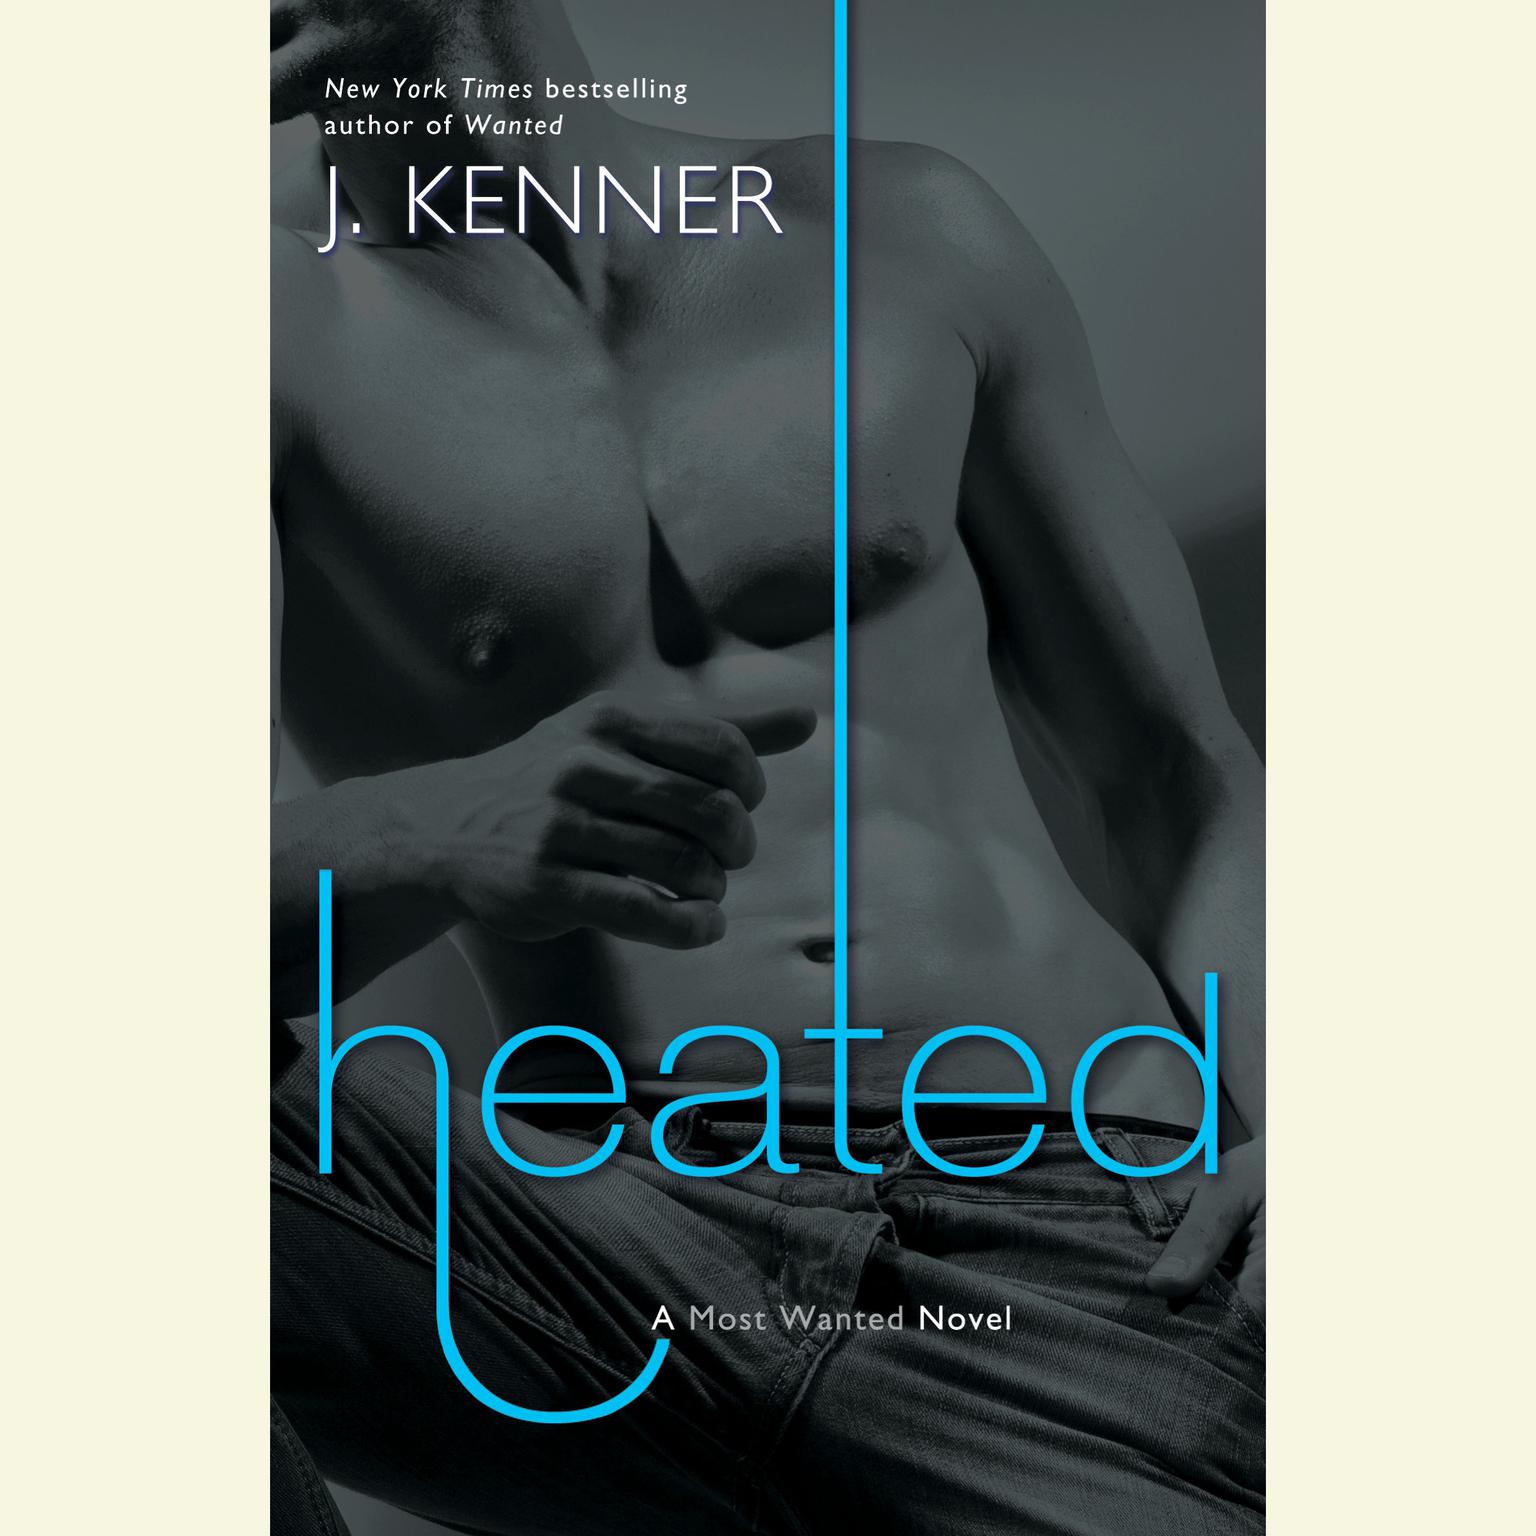 Heated: A Most Wanted Novel Audiobook, by J. Kenner